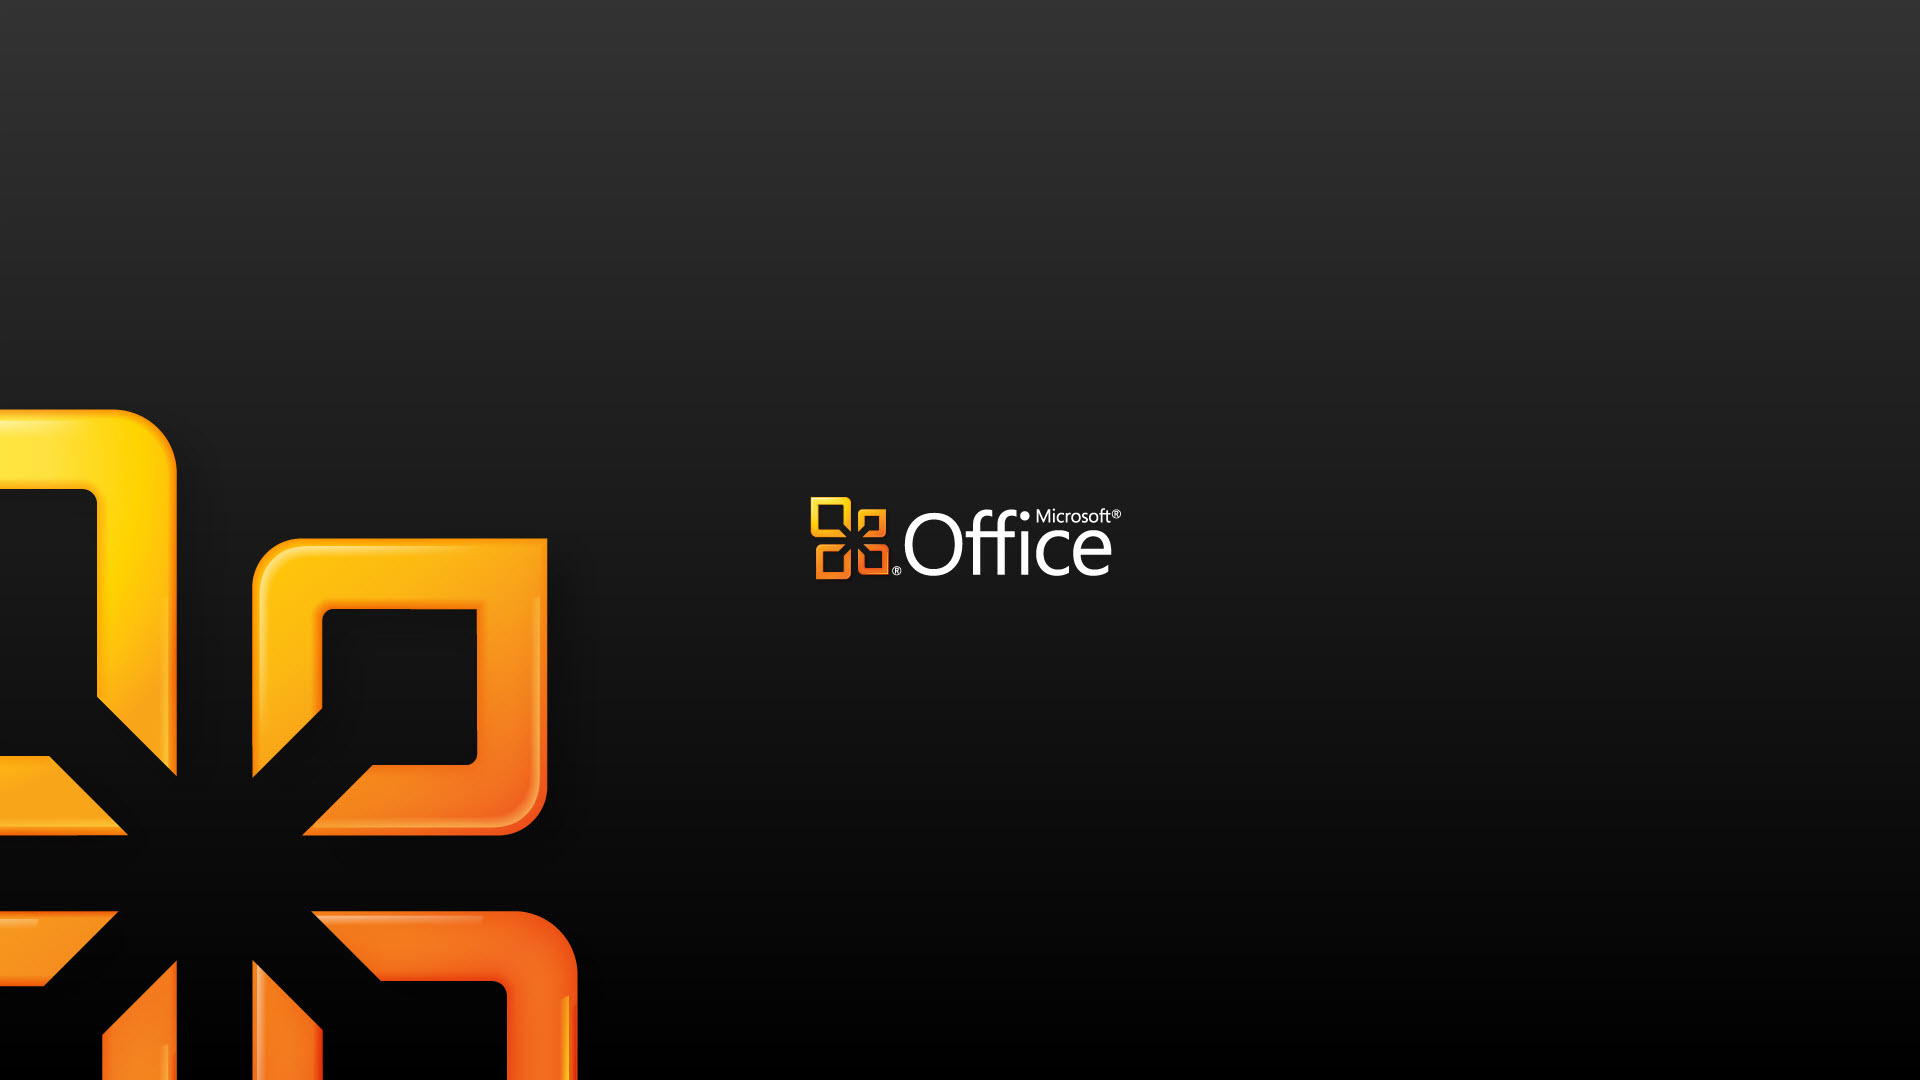 Microsoft Office Word Wallpaper HD Photo Collection